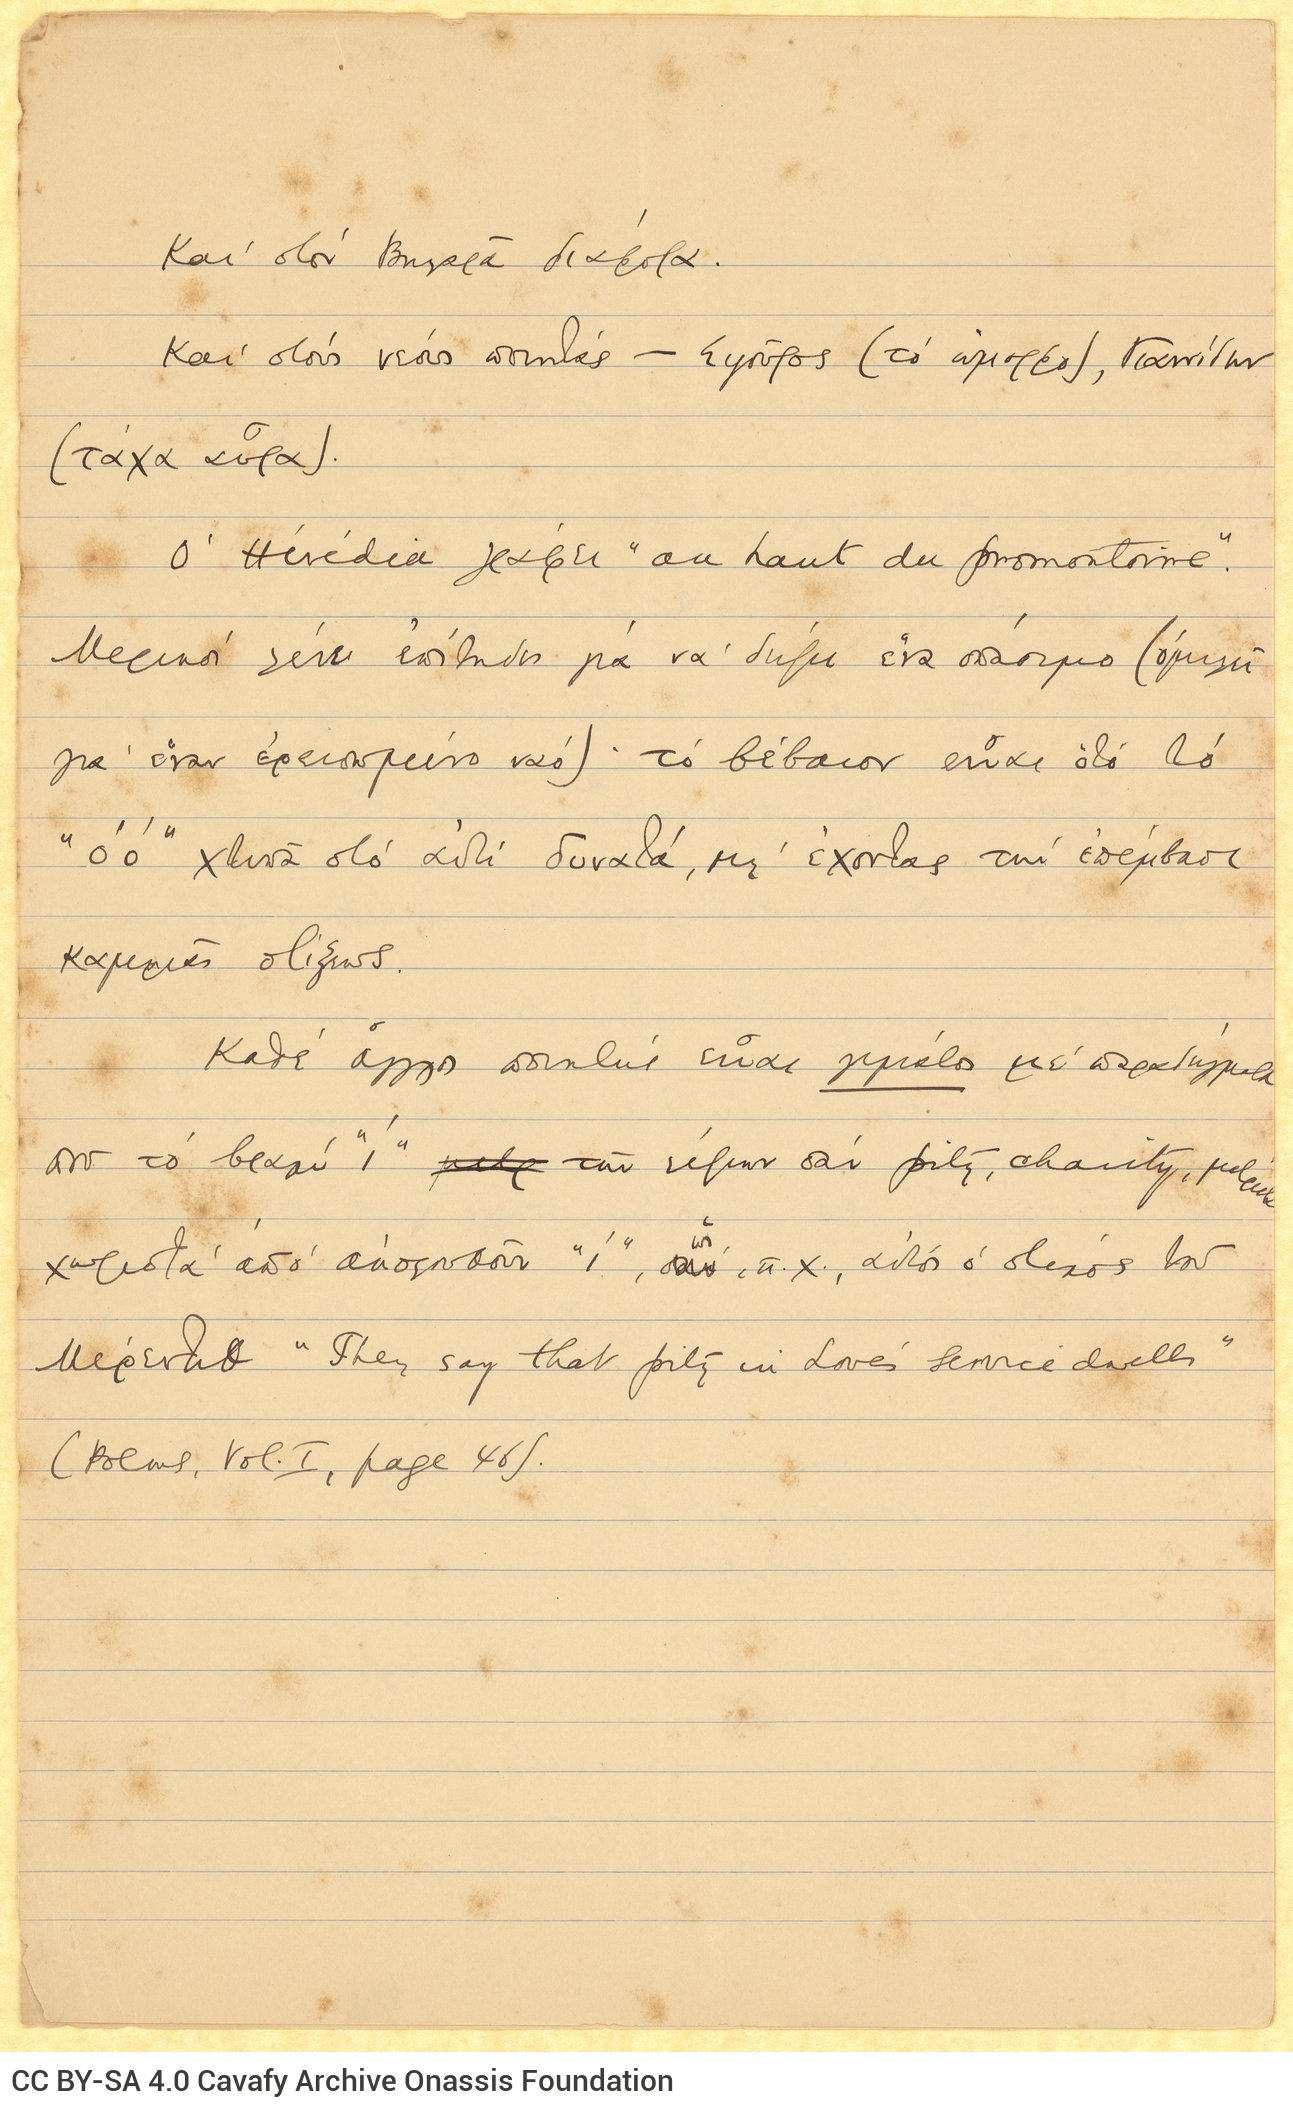 Handwritten notes on the poem "The Retinue of Dionysus" on the first two pages of a ruled double sheet notepaper. The othe